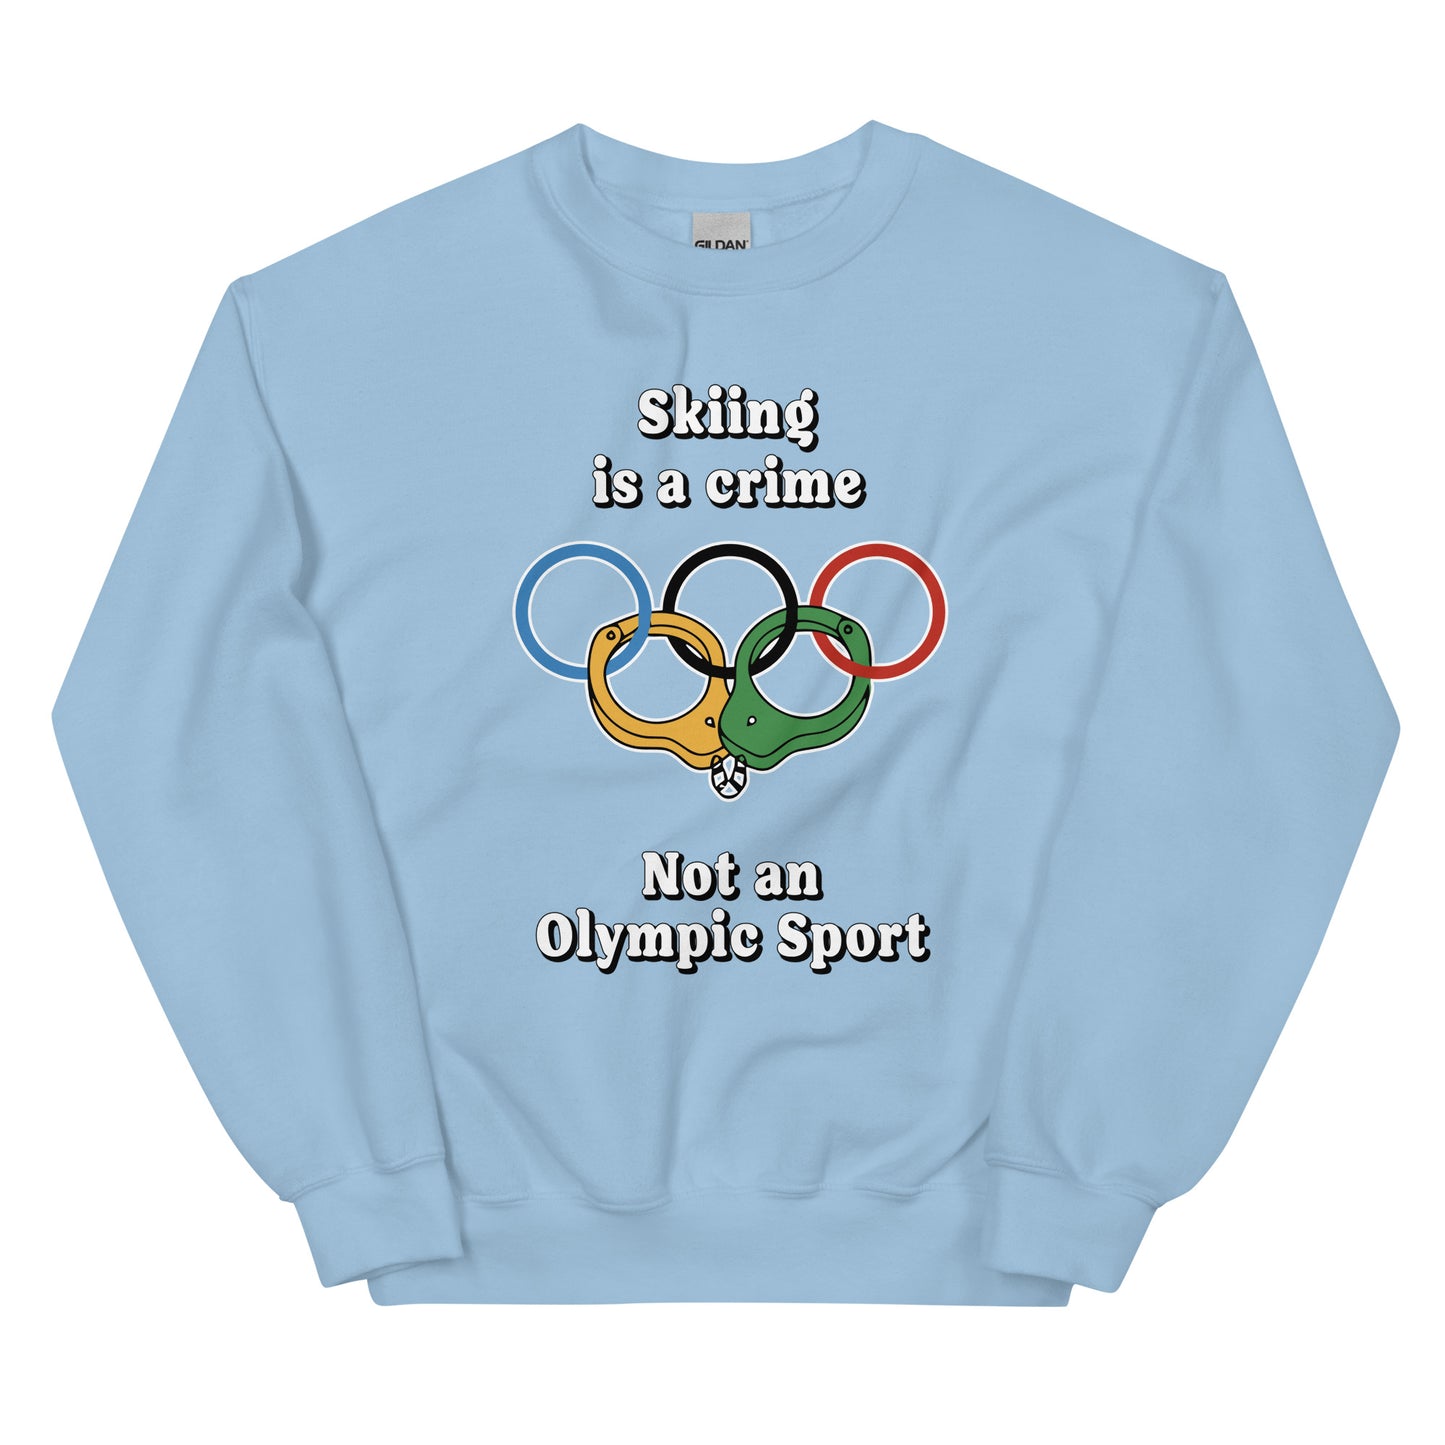 Skiing is a crime not an olympic sport design printed on a crewneck sweatshirt by Whistler Shirts